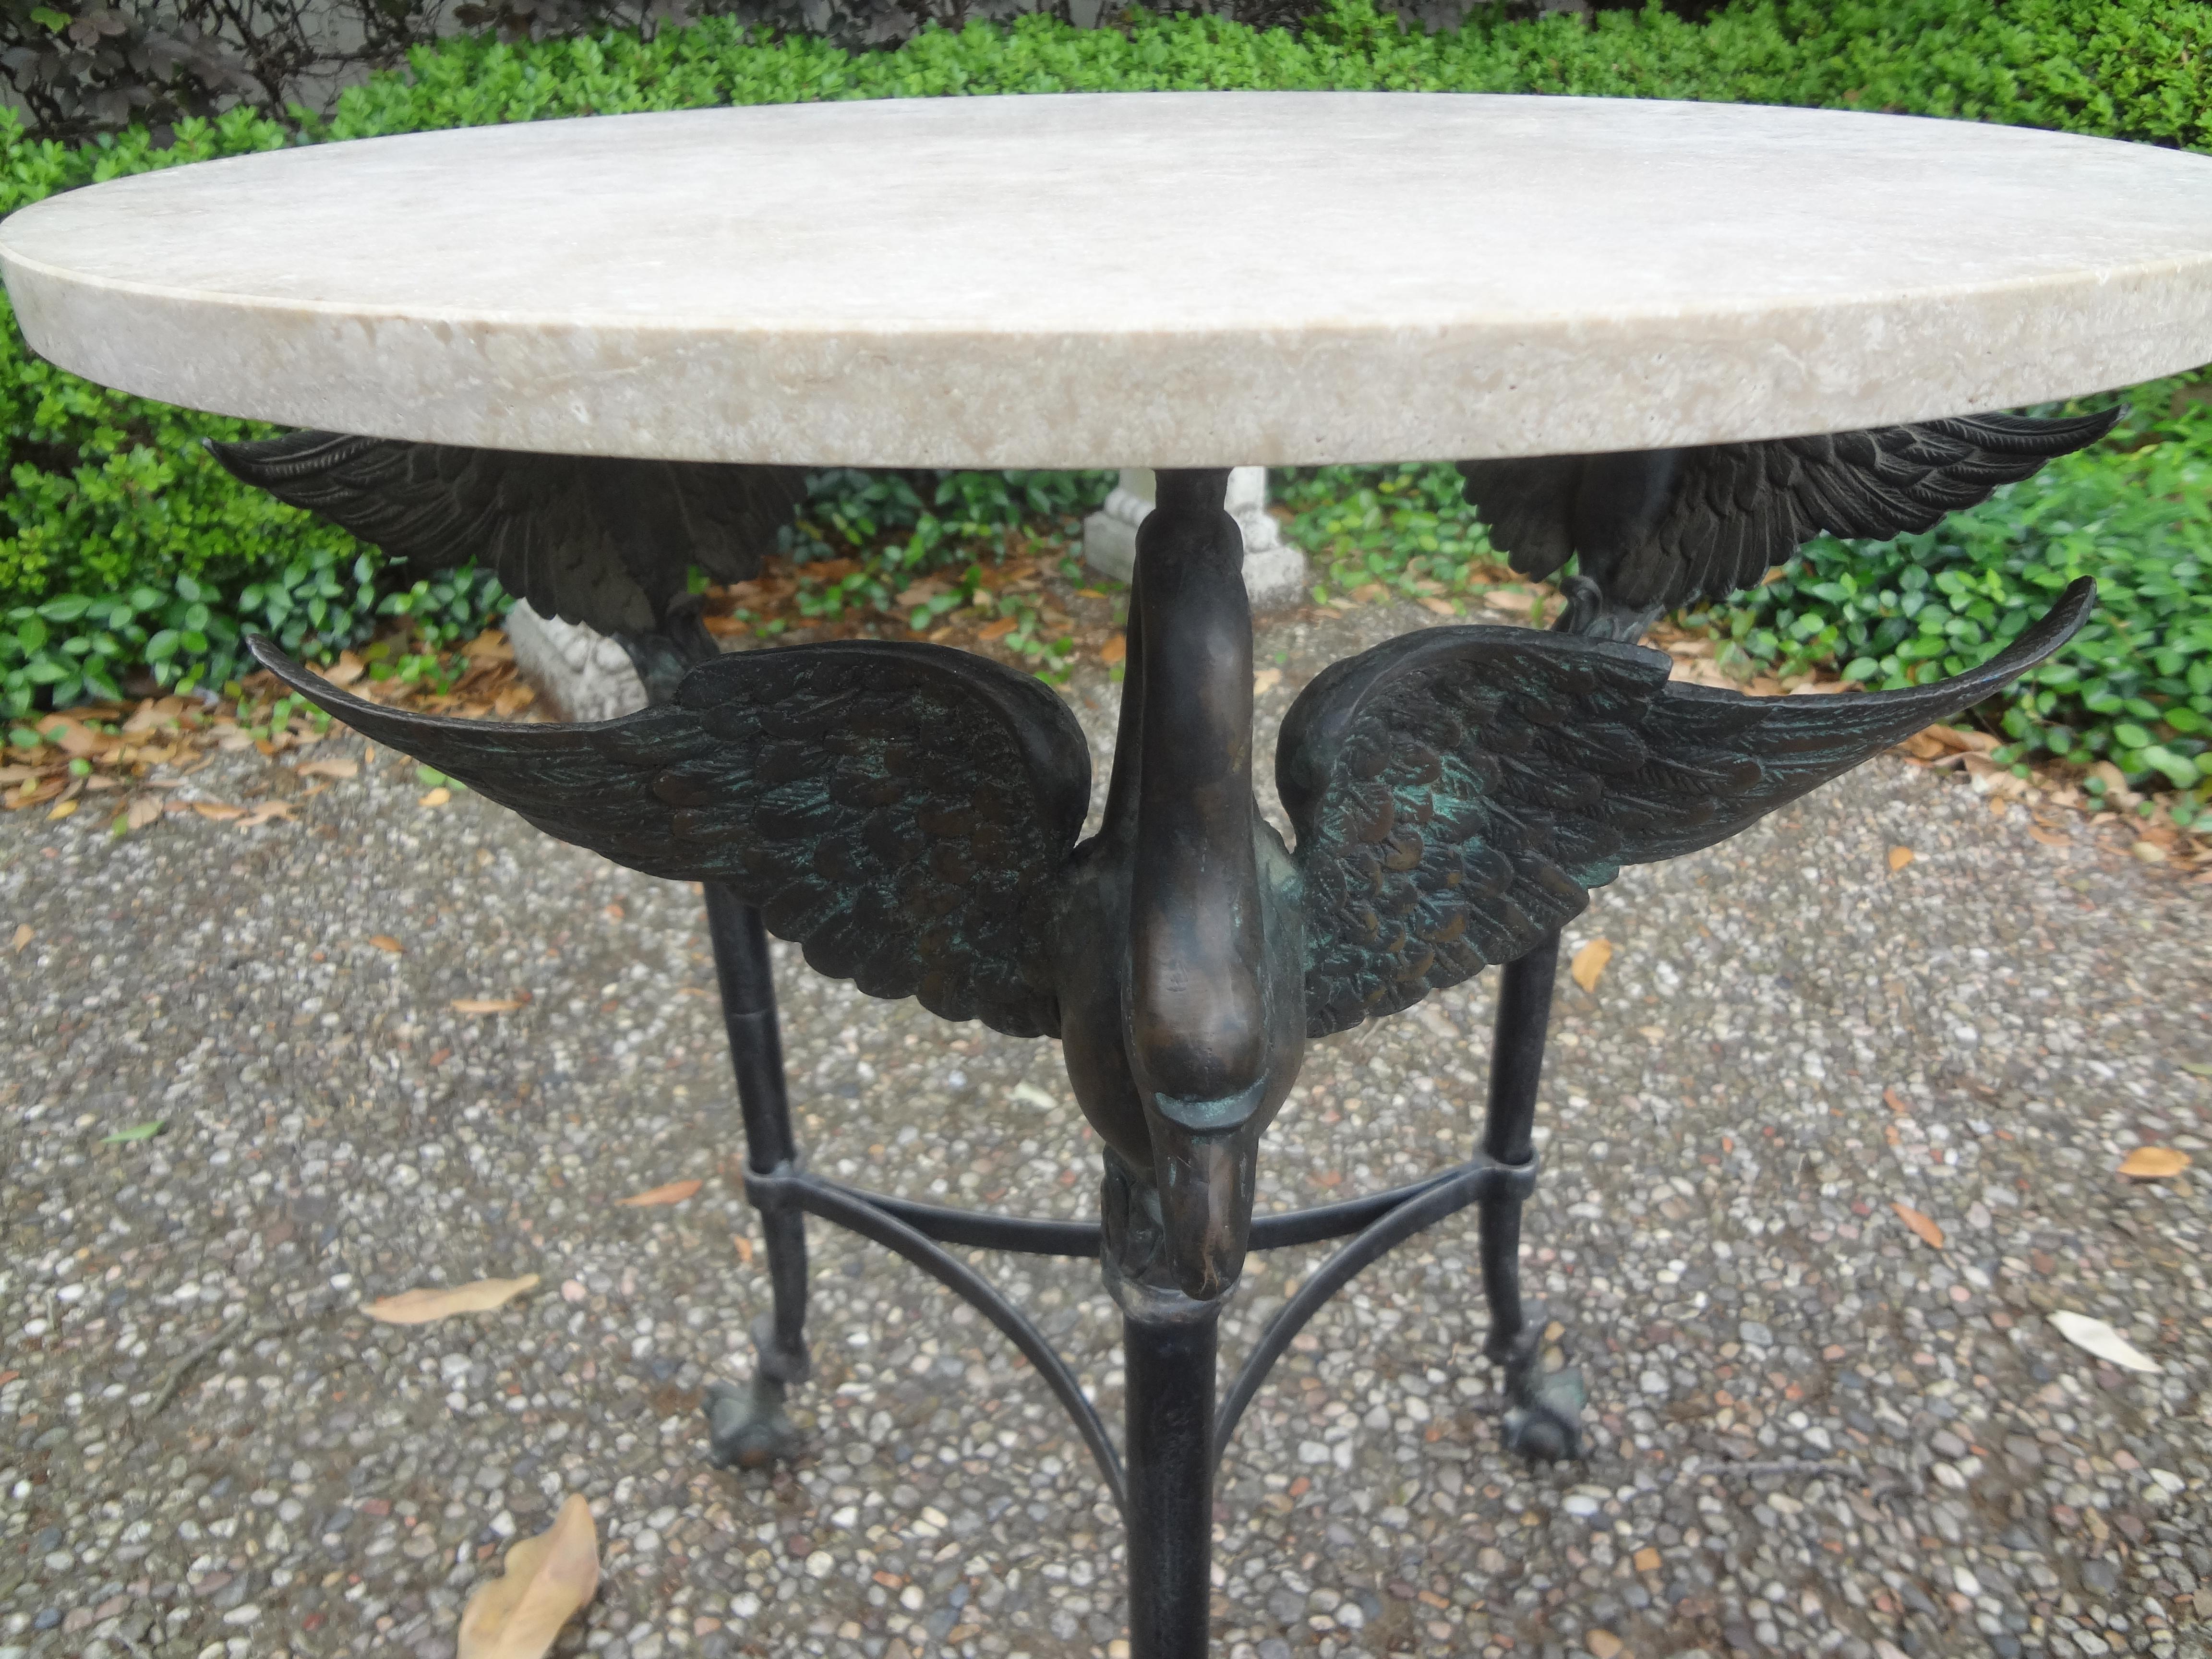 Vintage Neoclassical style bronze table with travertine top
Vintage Neoclassical style bronze table with travertine top. This stunning Empire style side table, drink table or gueridon is comprised of three swans with large talons clutching ball